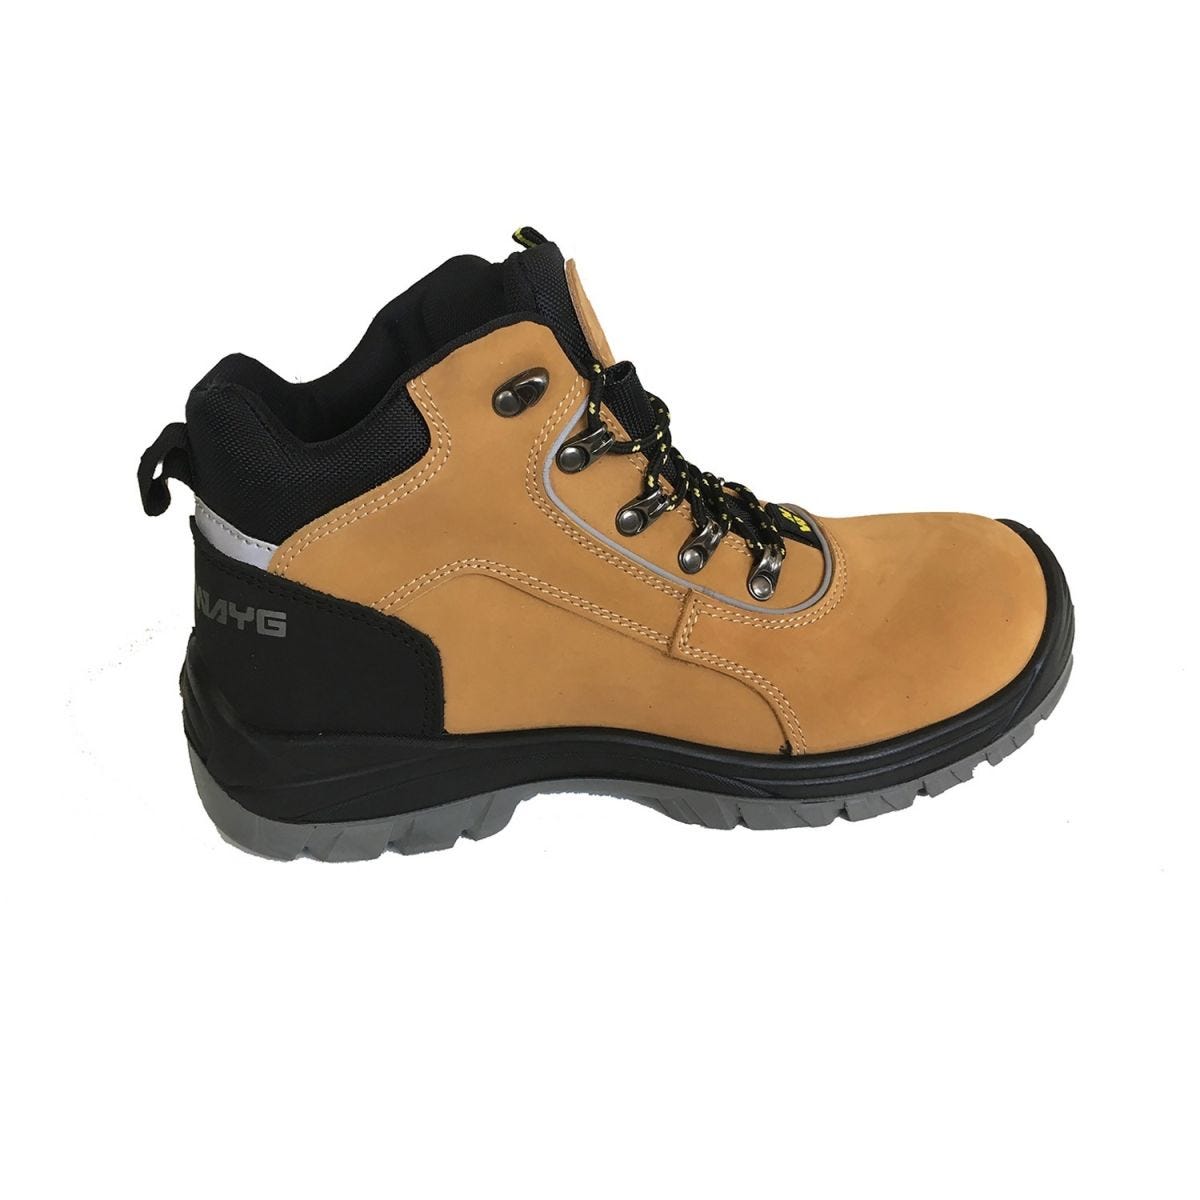 CHAUSSURES MONTANTES DE SECURITE RYAN CAMEL - NORTH WAYS - Taille 43 1